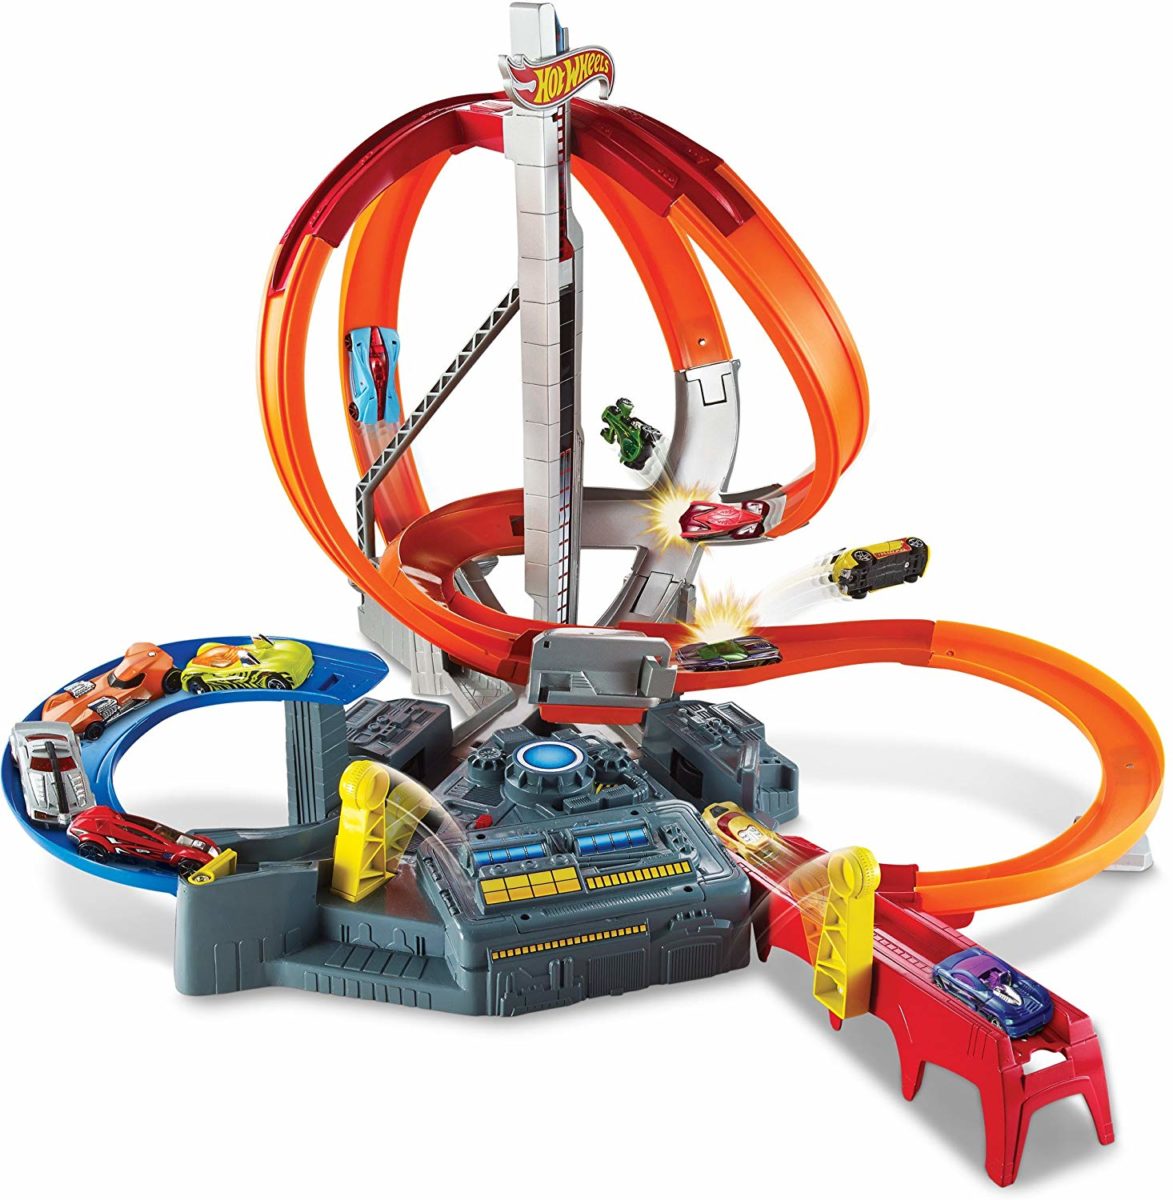 Hot Wheels Spin Storm Track Set - Top Toys and Gifts for Seven Year Old Boys 2